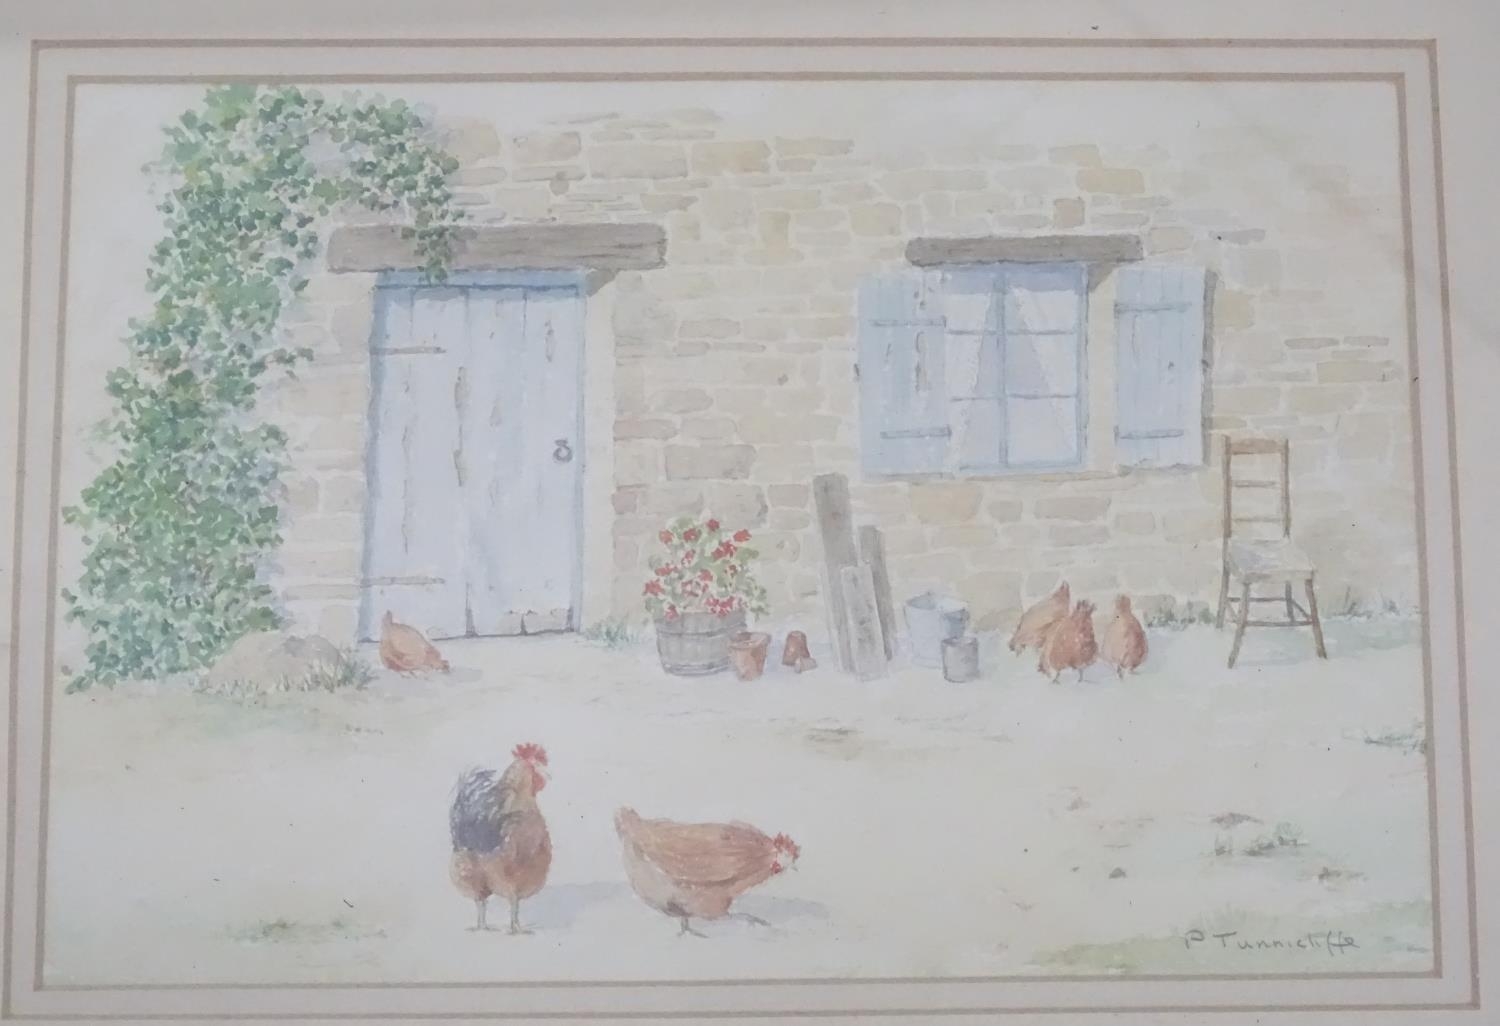 A watercolour depicting chickens in a barnyard, signed P. Tunnicliffe Please Note - we do not make - Image 3 of 6